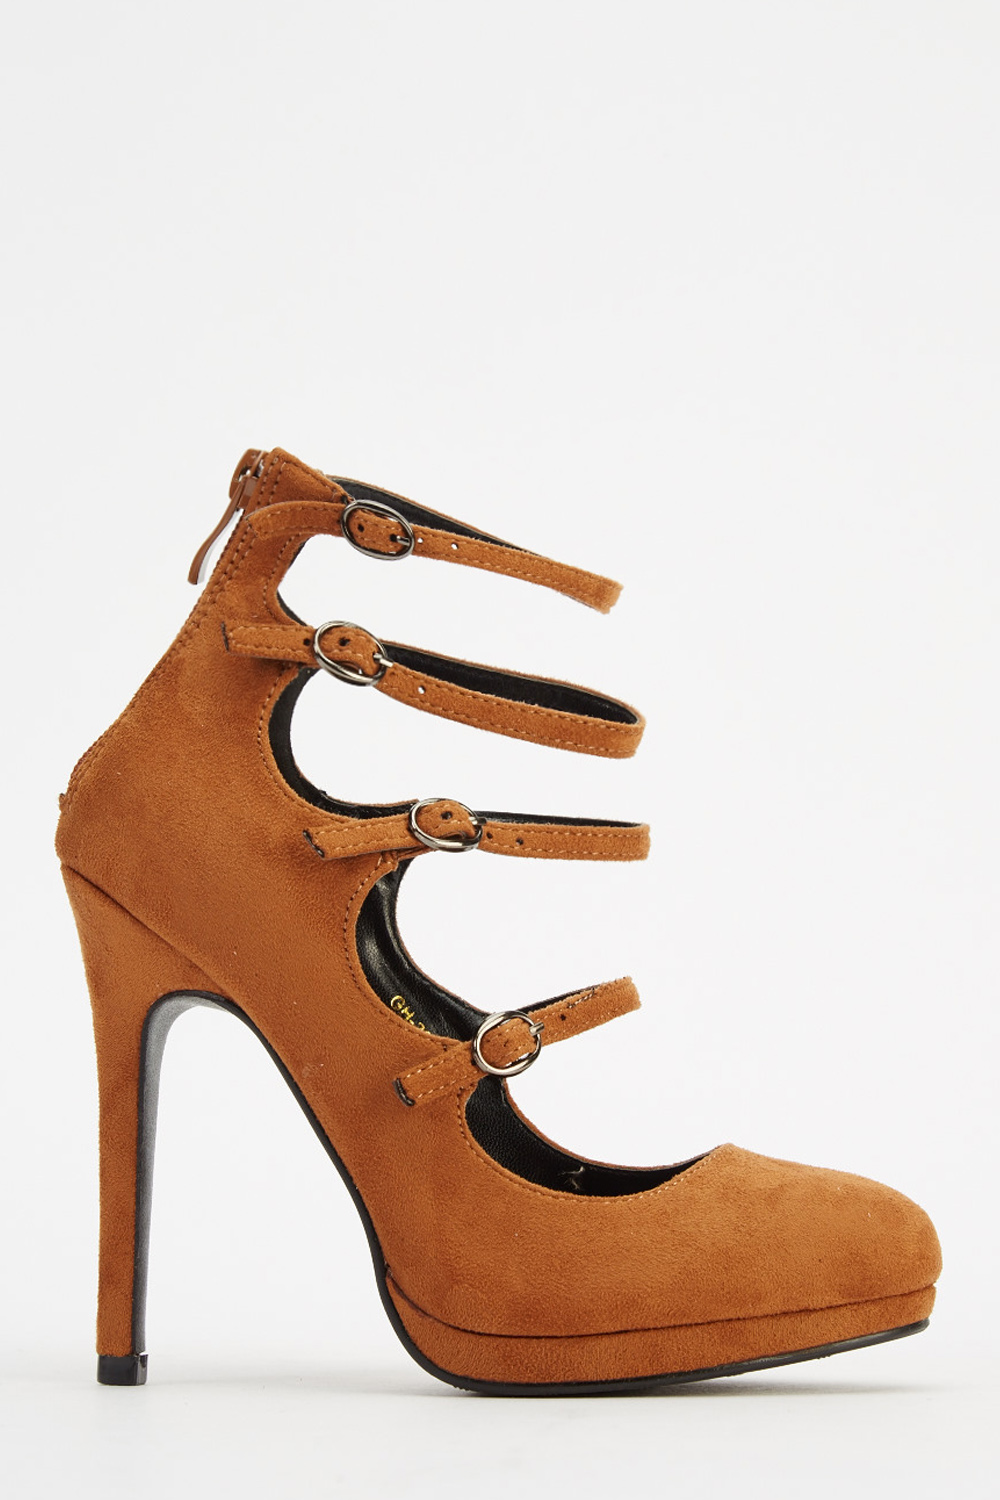 Strappy Front Suedette Heels - Khaki or Camel - Just $2